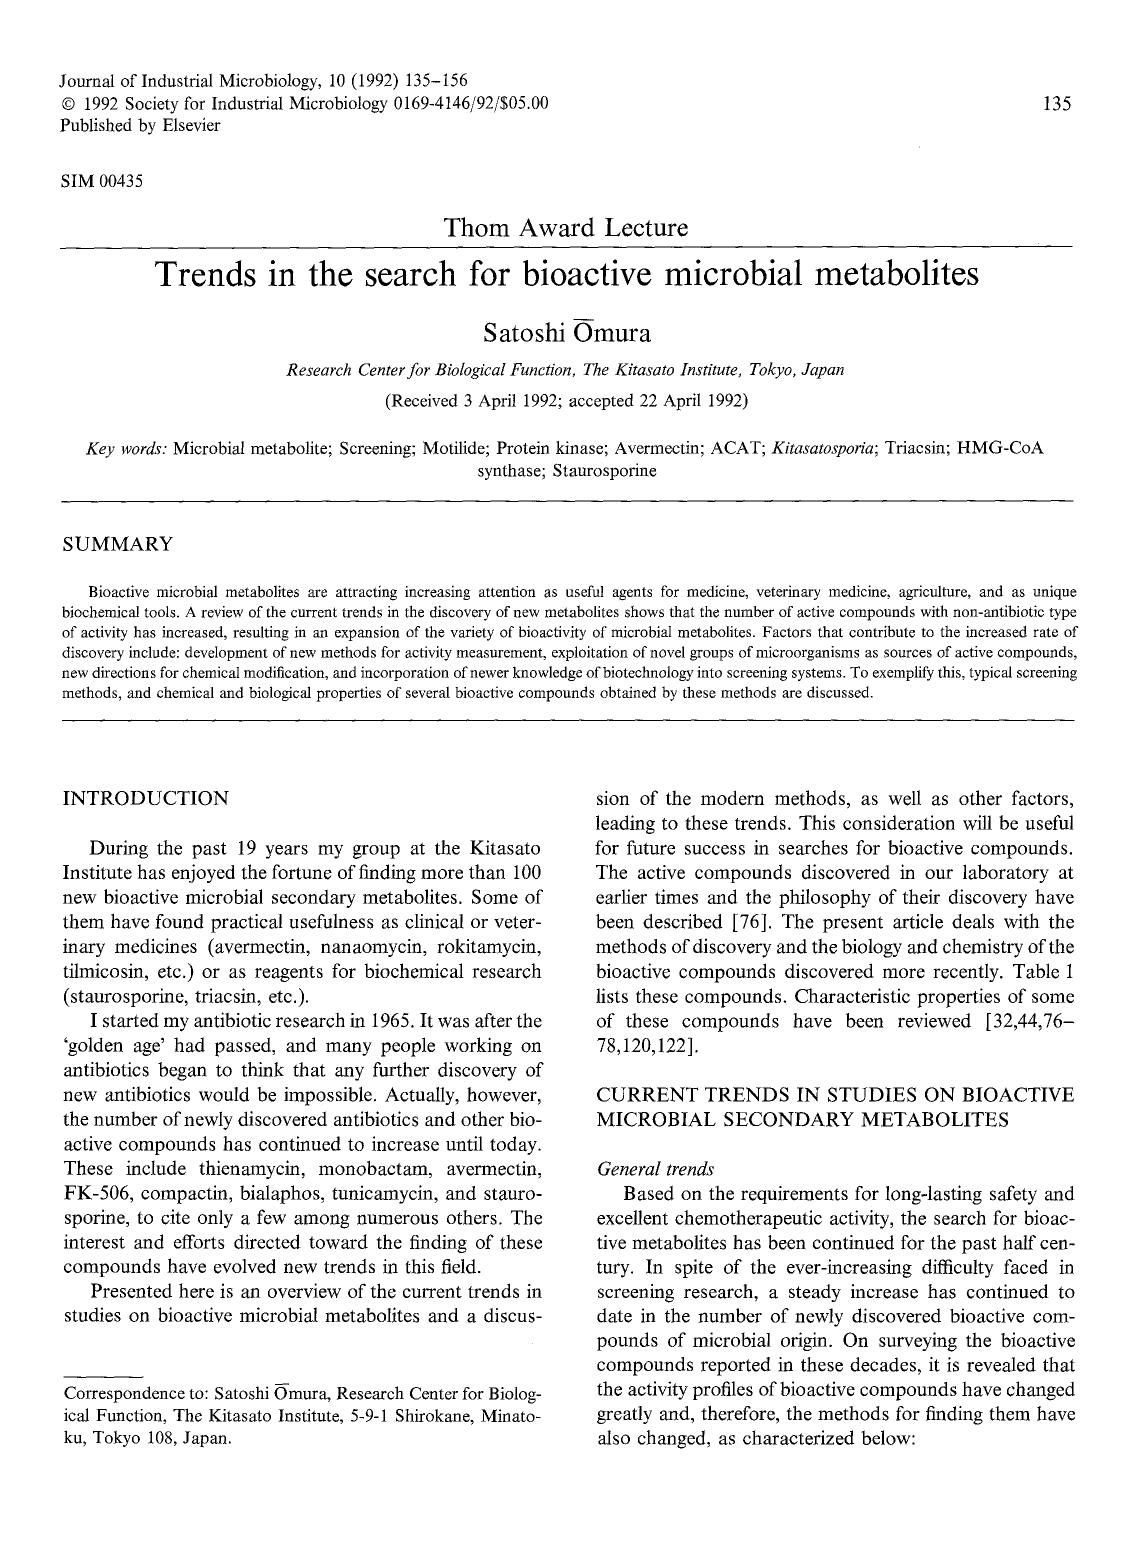 Trends in the search for bioactive microbial metabolites by Unknown